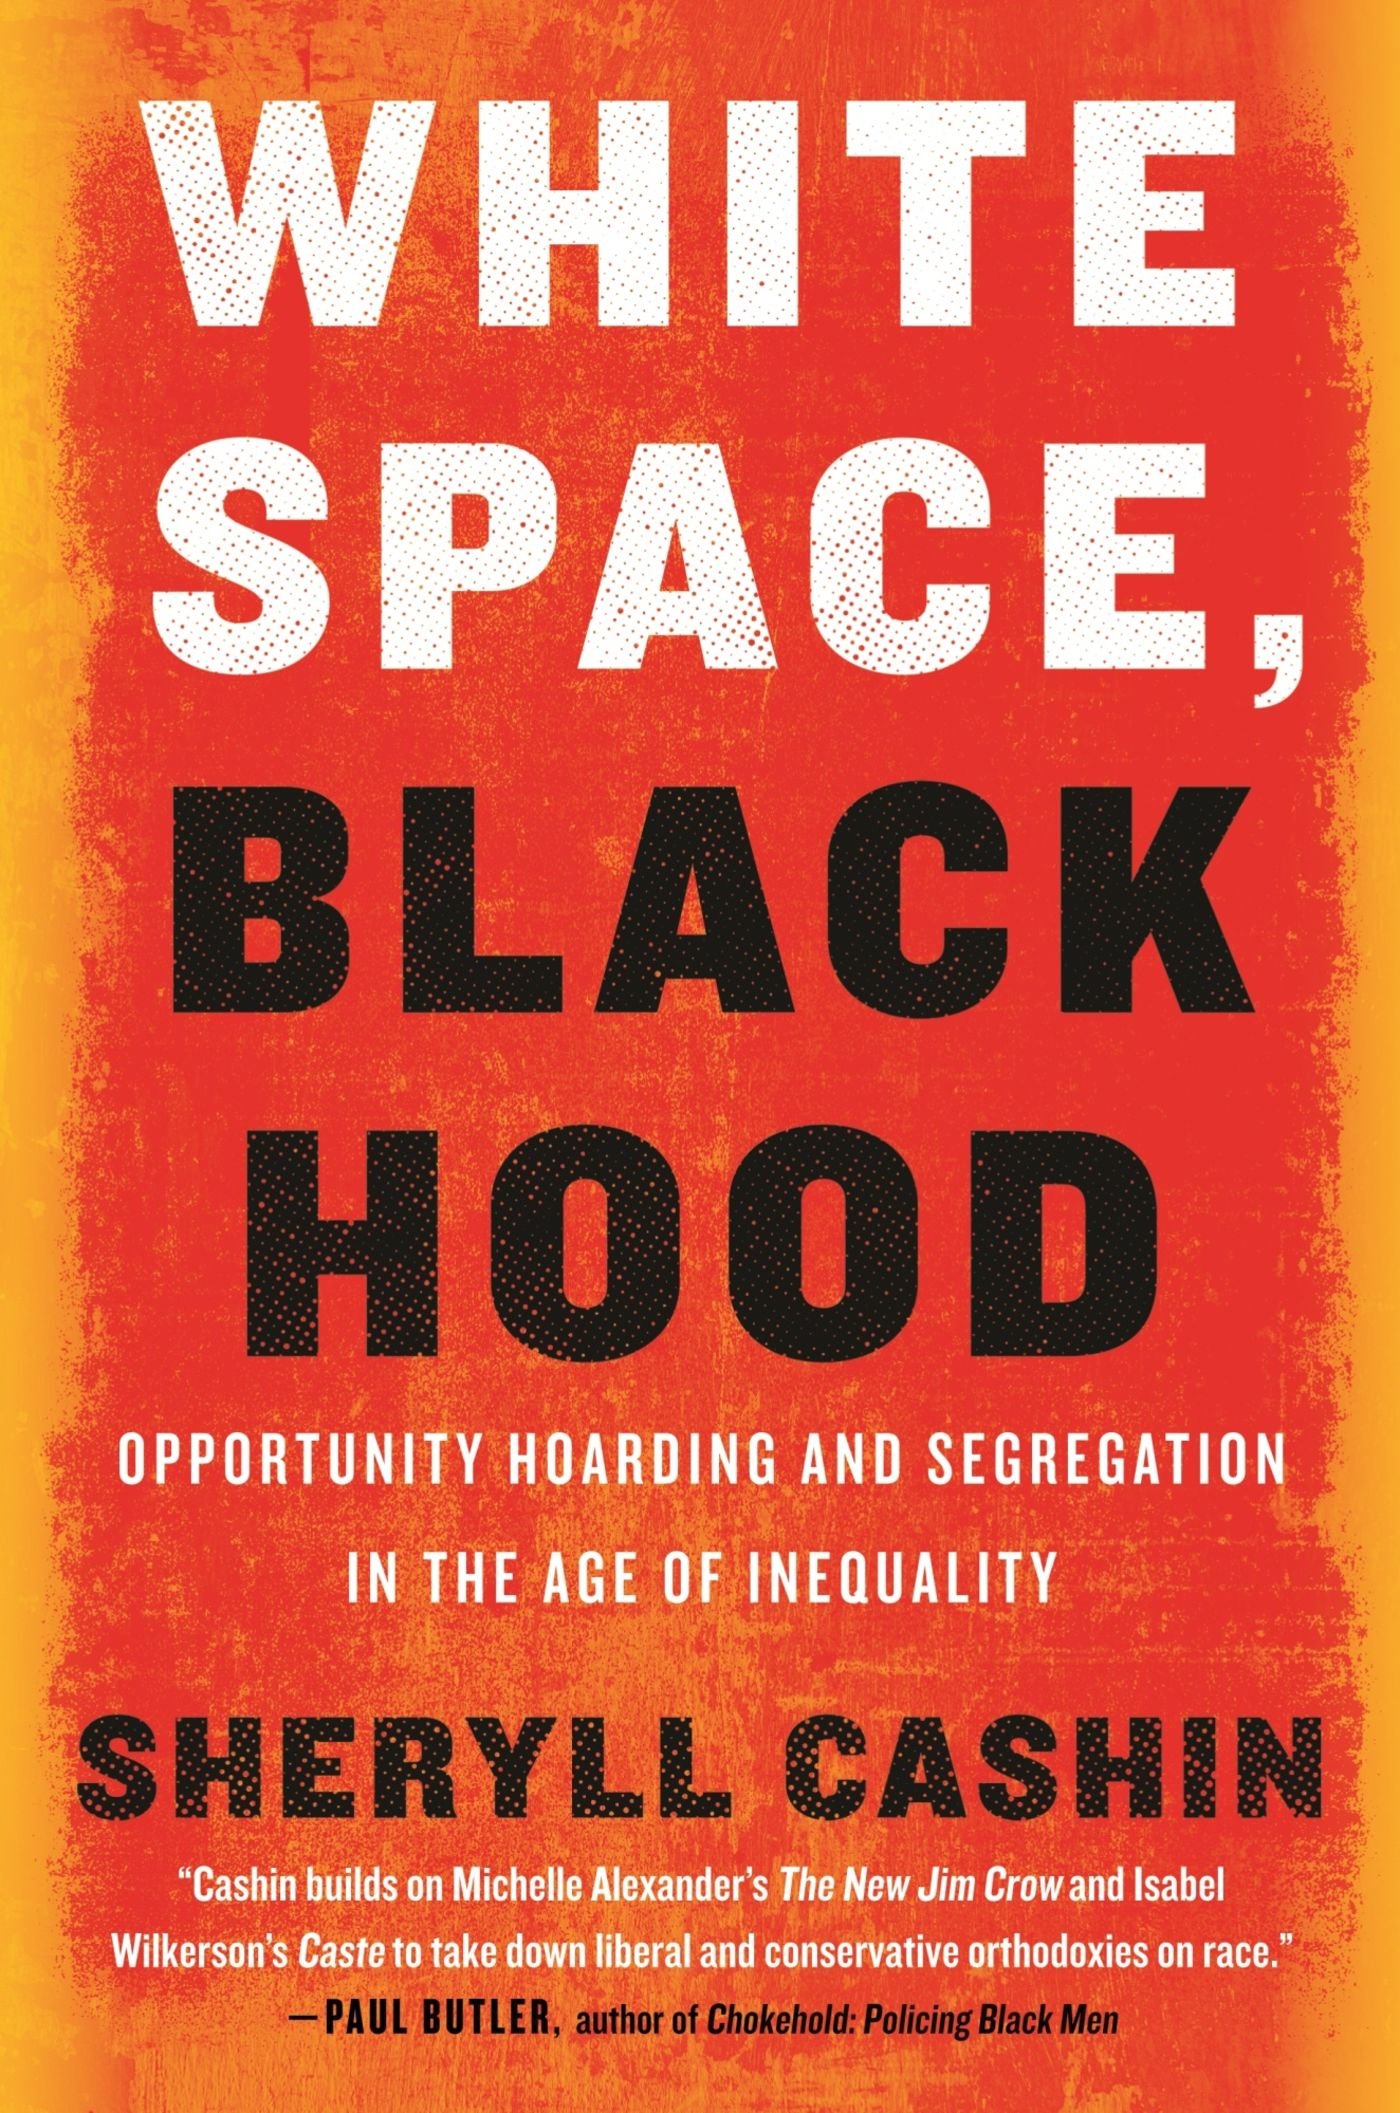 Opportunity Hoarding and Segregation in 21st Century America